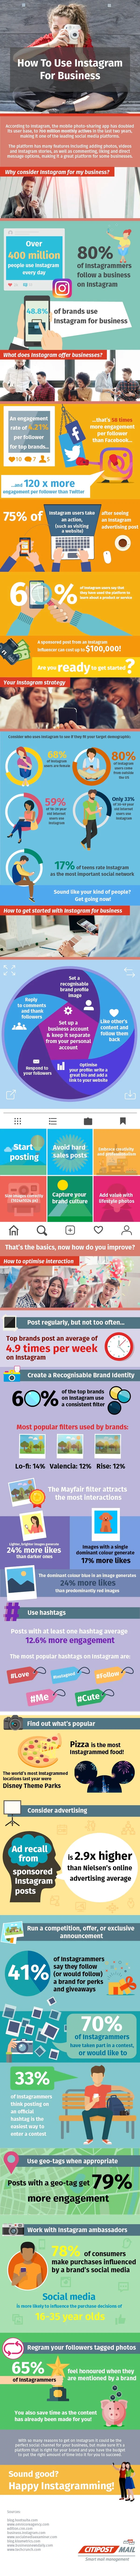 How to Use Instagram for Business - infographic